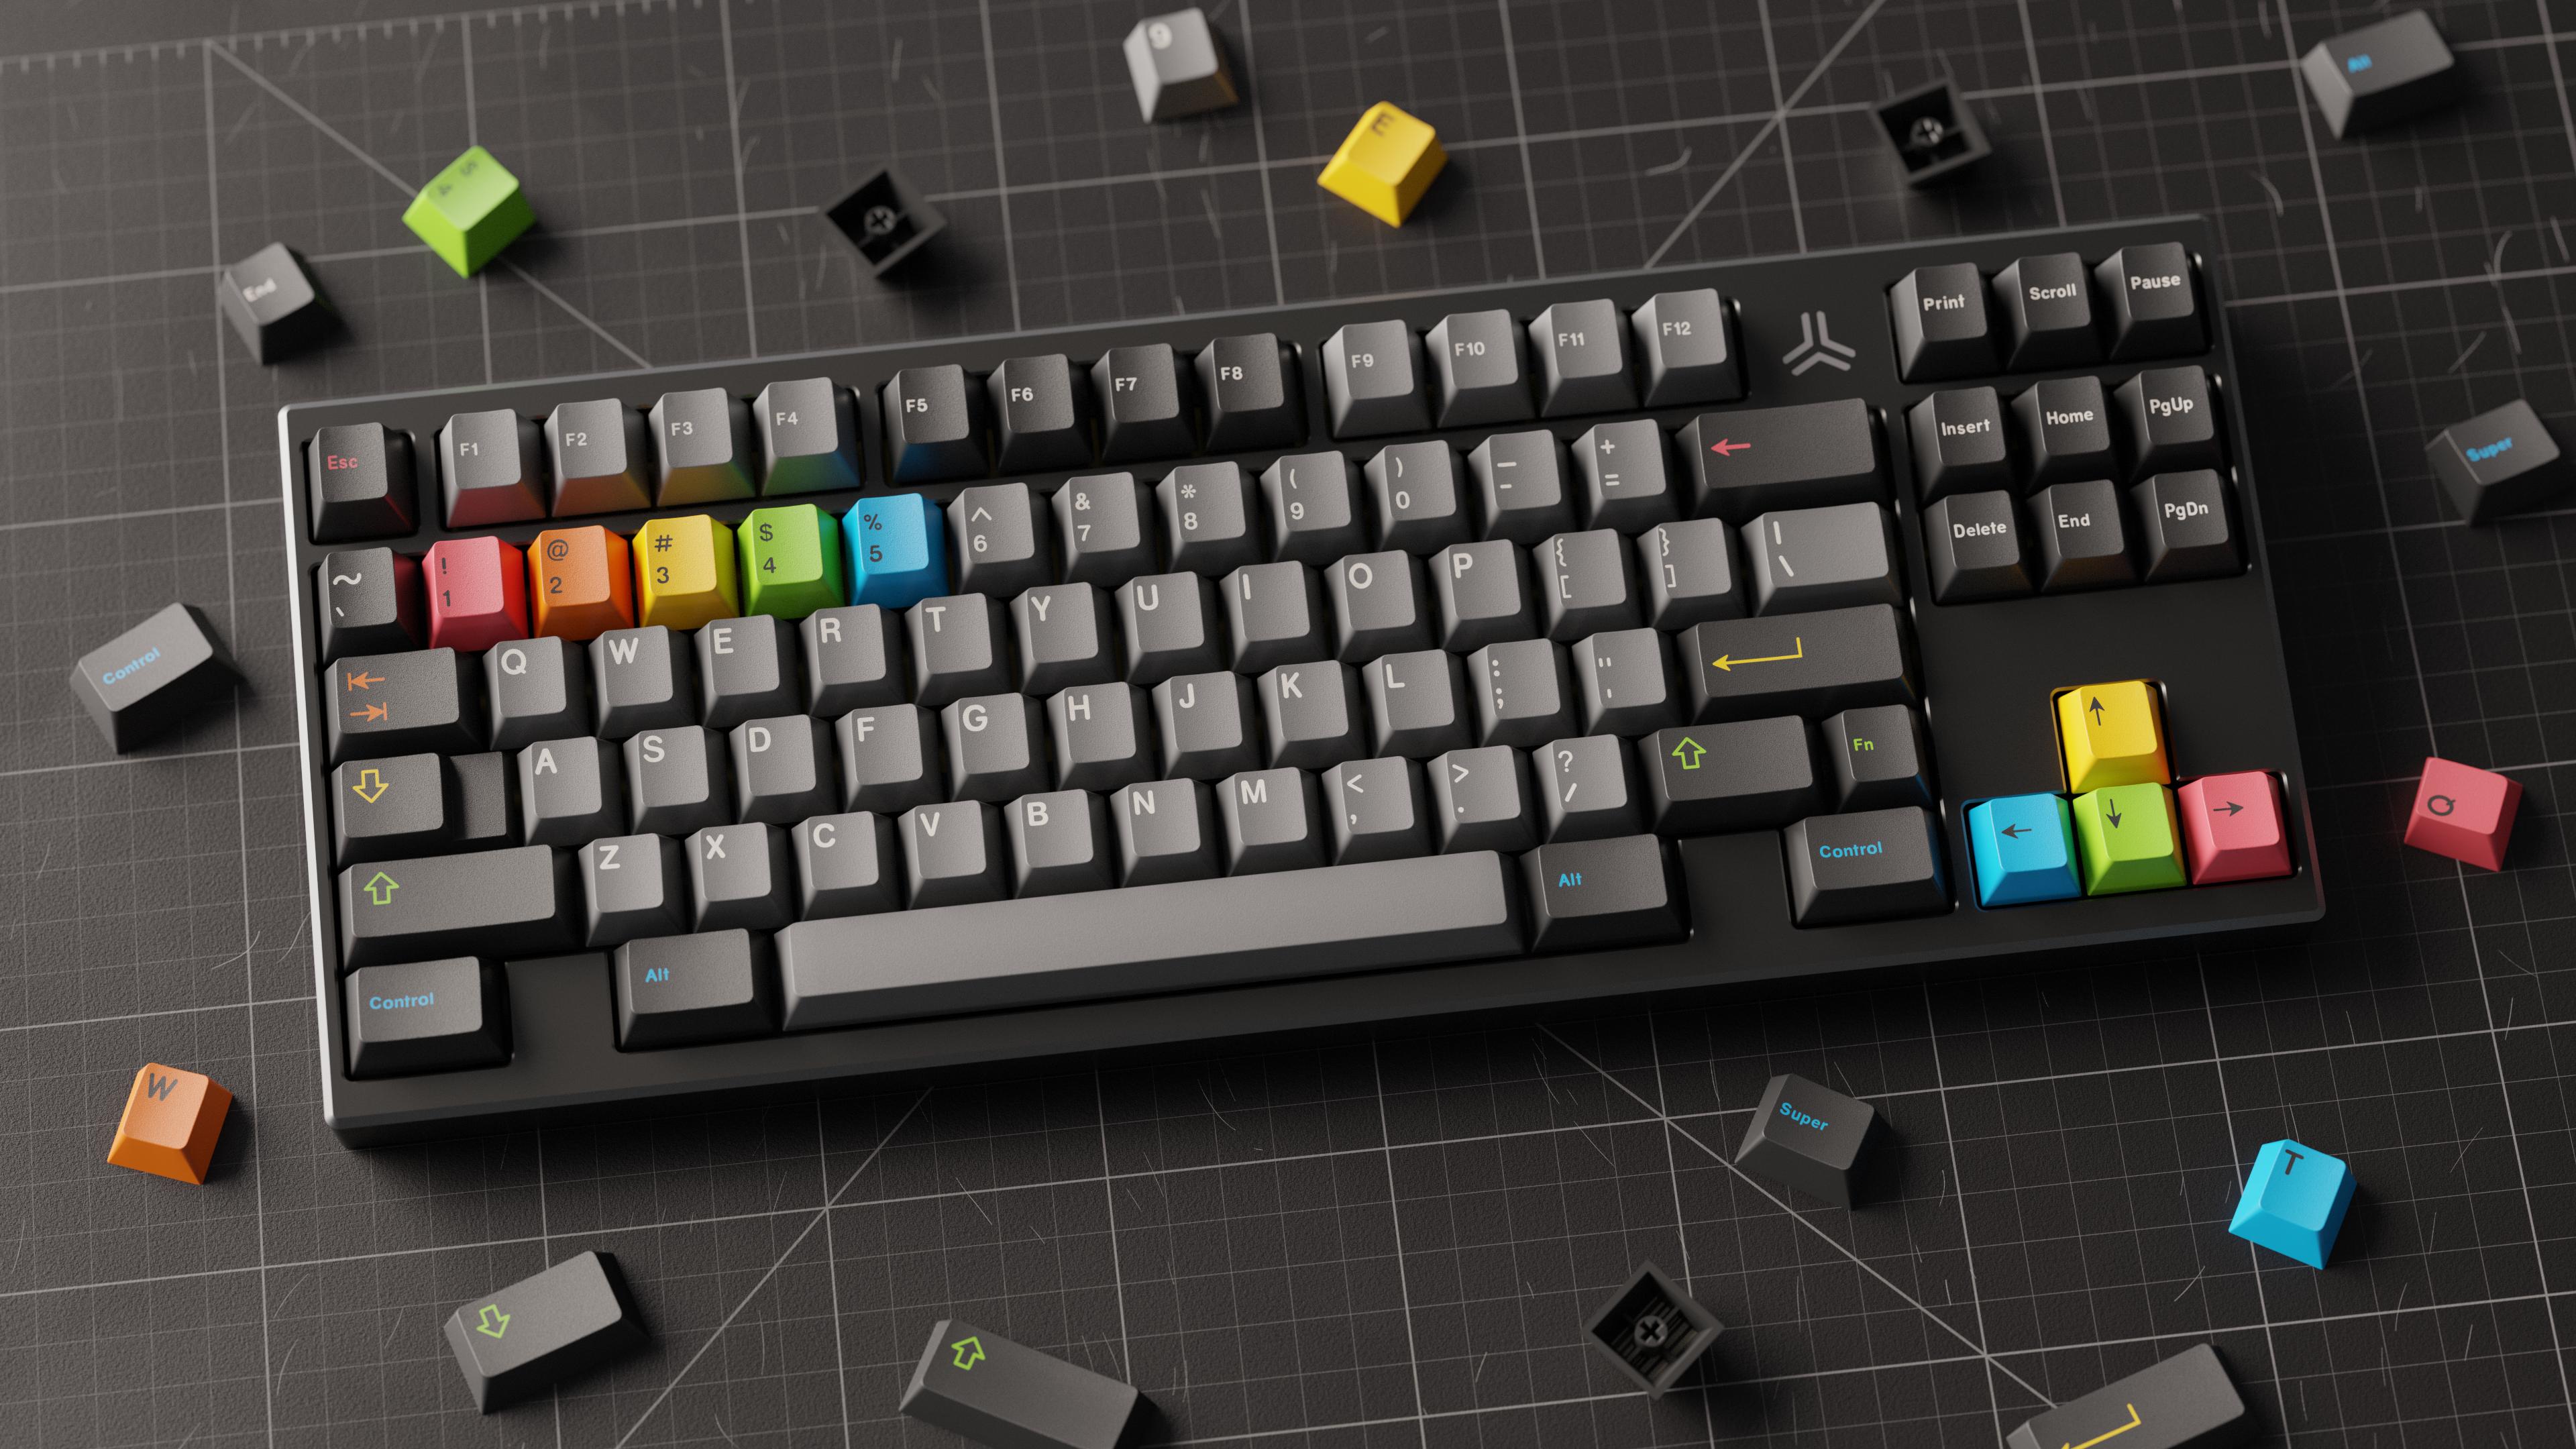 General 3840x2160 keyboards qwerty technology table keycap prototypes selective coloring